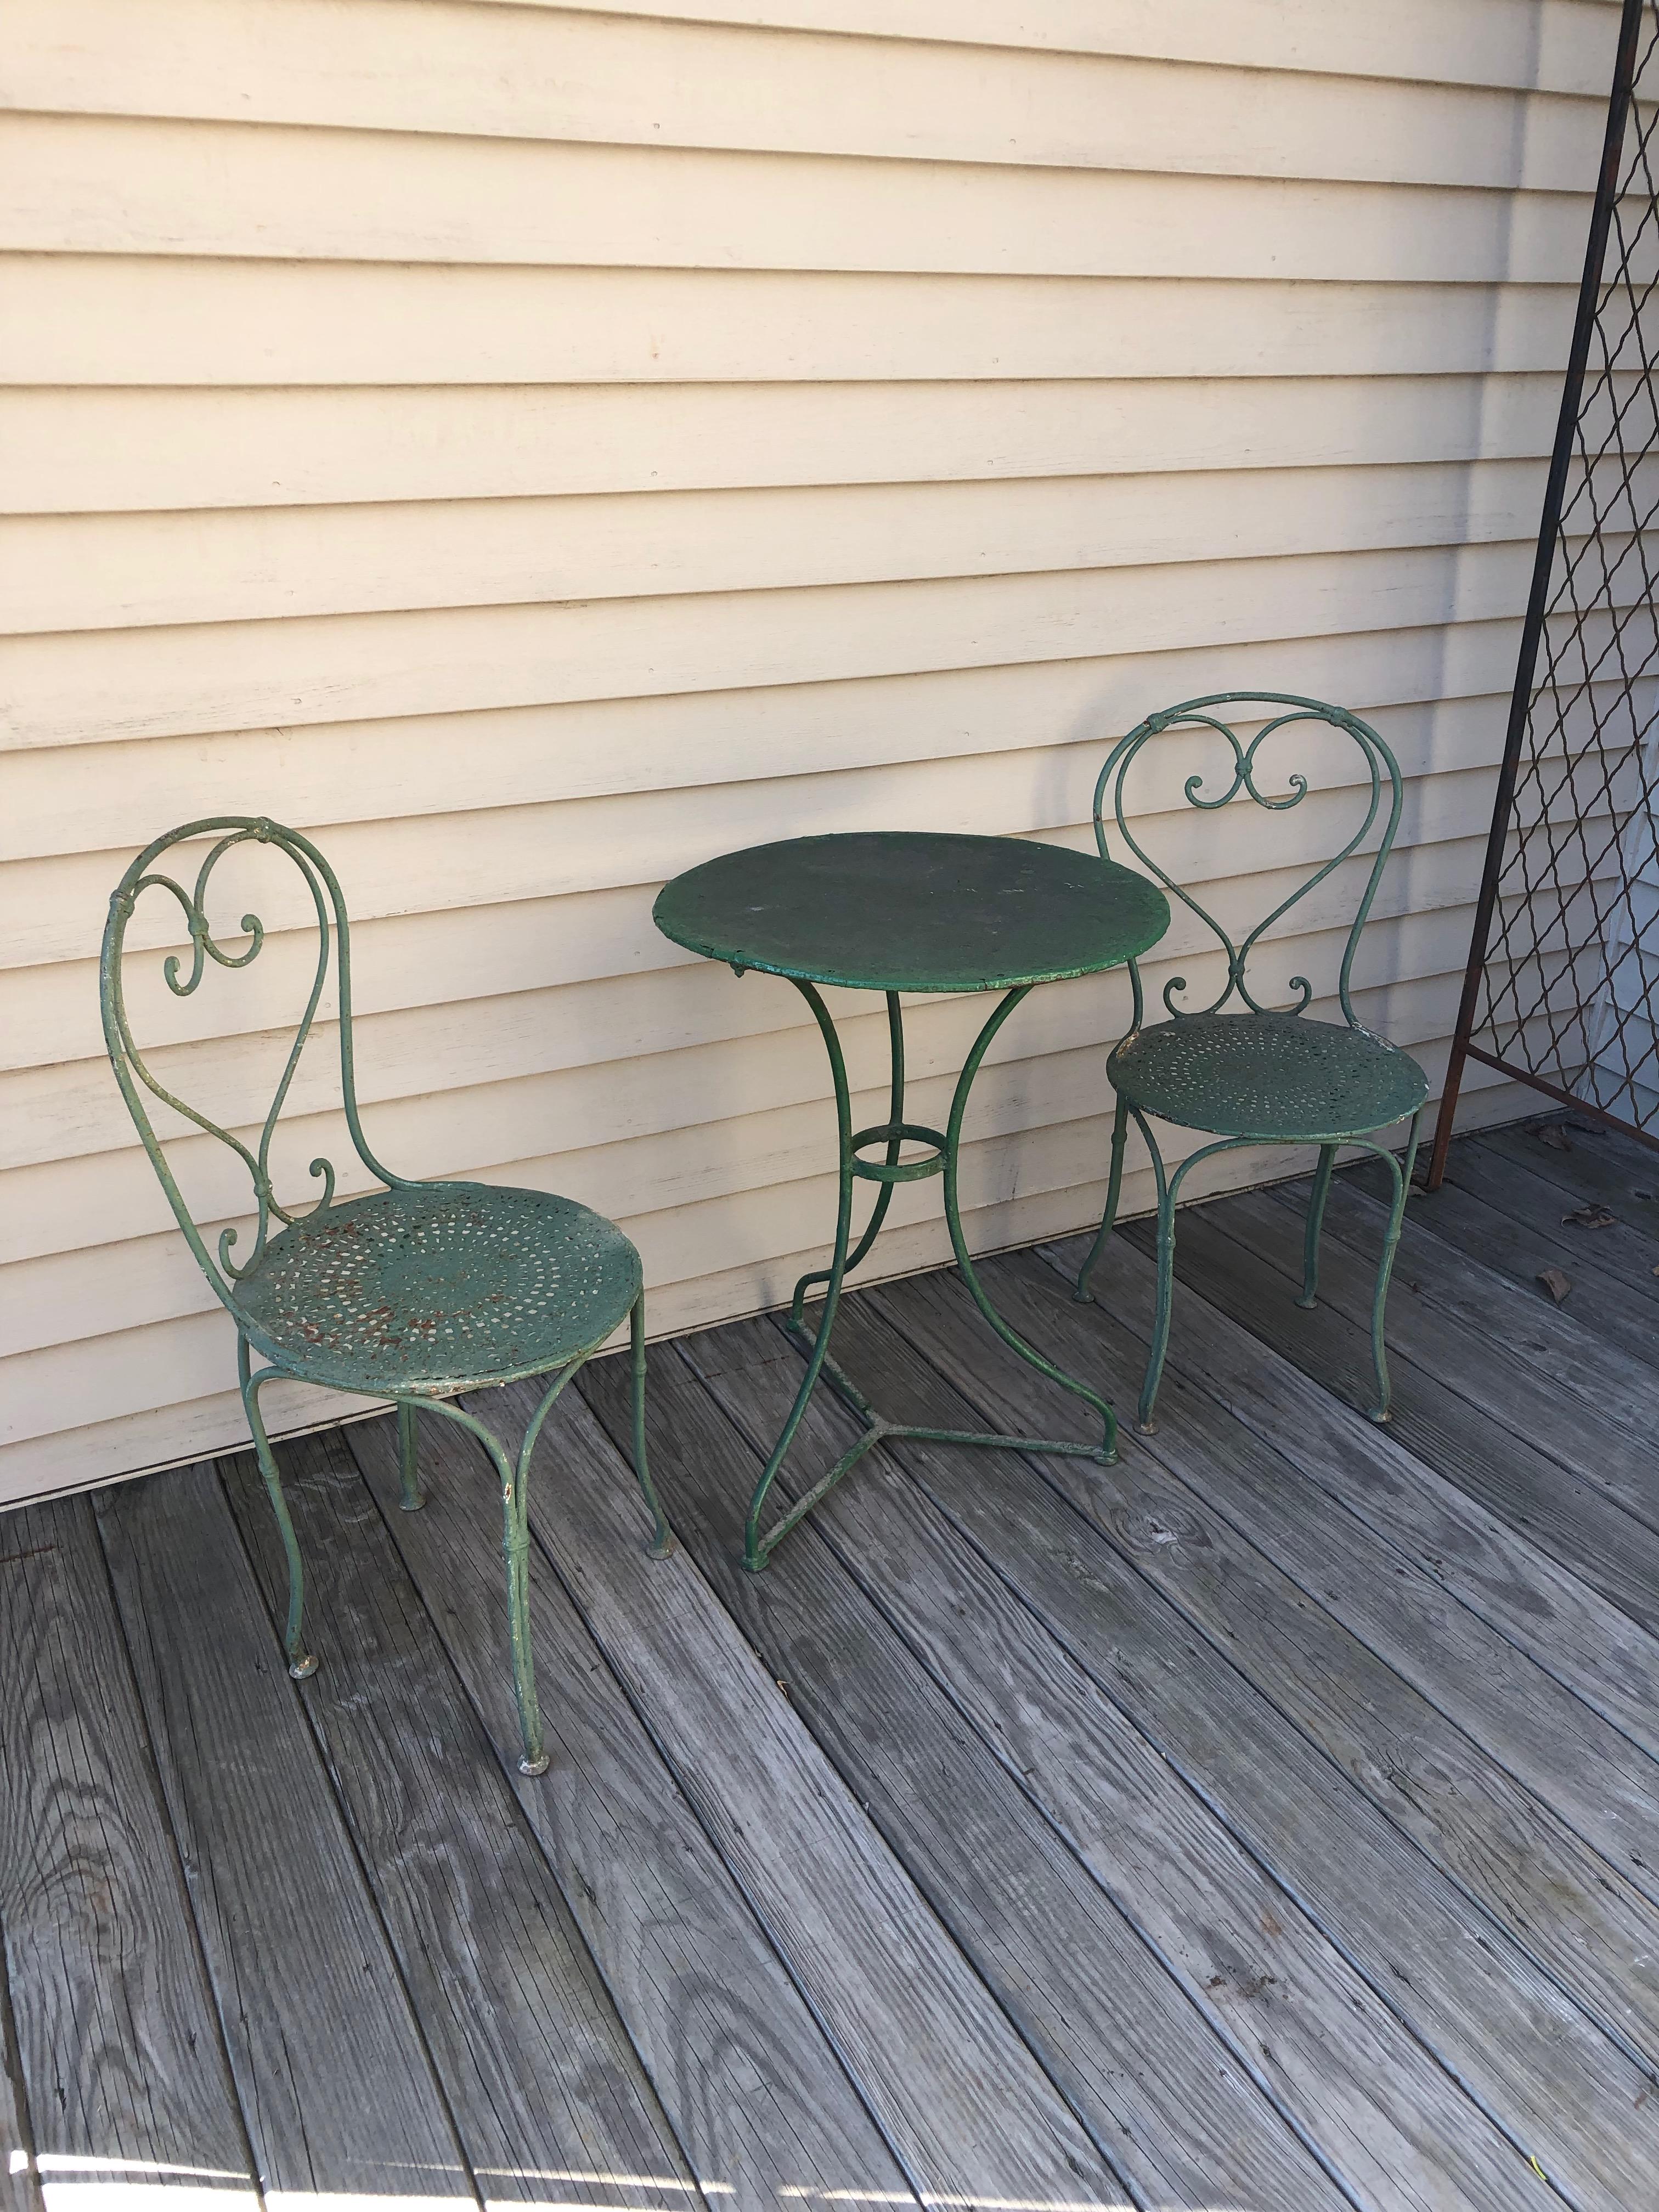 Oh, to sit in the shade, underneath a tree, with a drink in hand, planning your next holiday. That’s what this lovely three-piece bistro set in old green paint was made for! The chairs have beautiful pierced seats, heart-motif backs, and date to